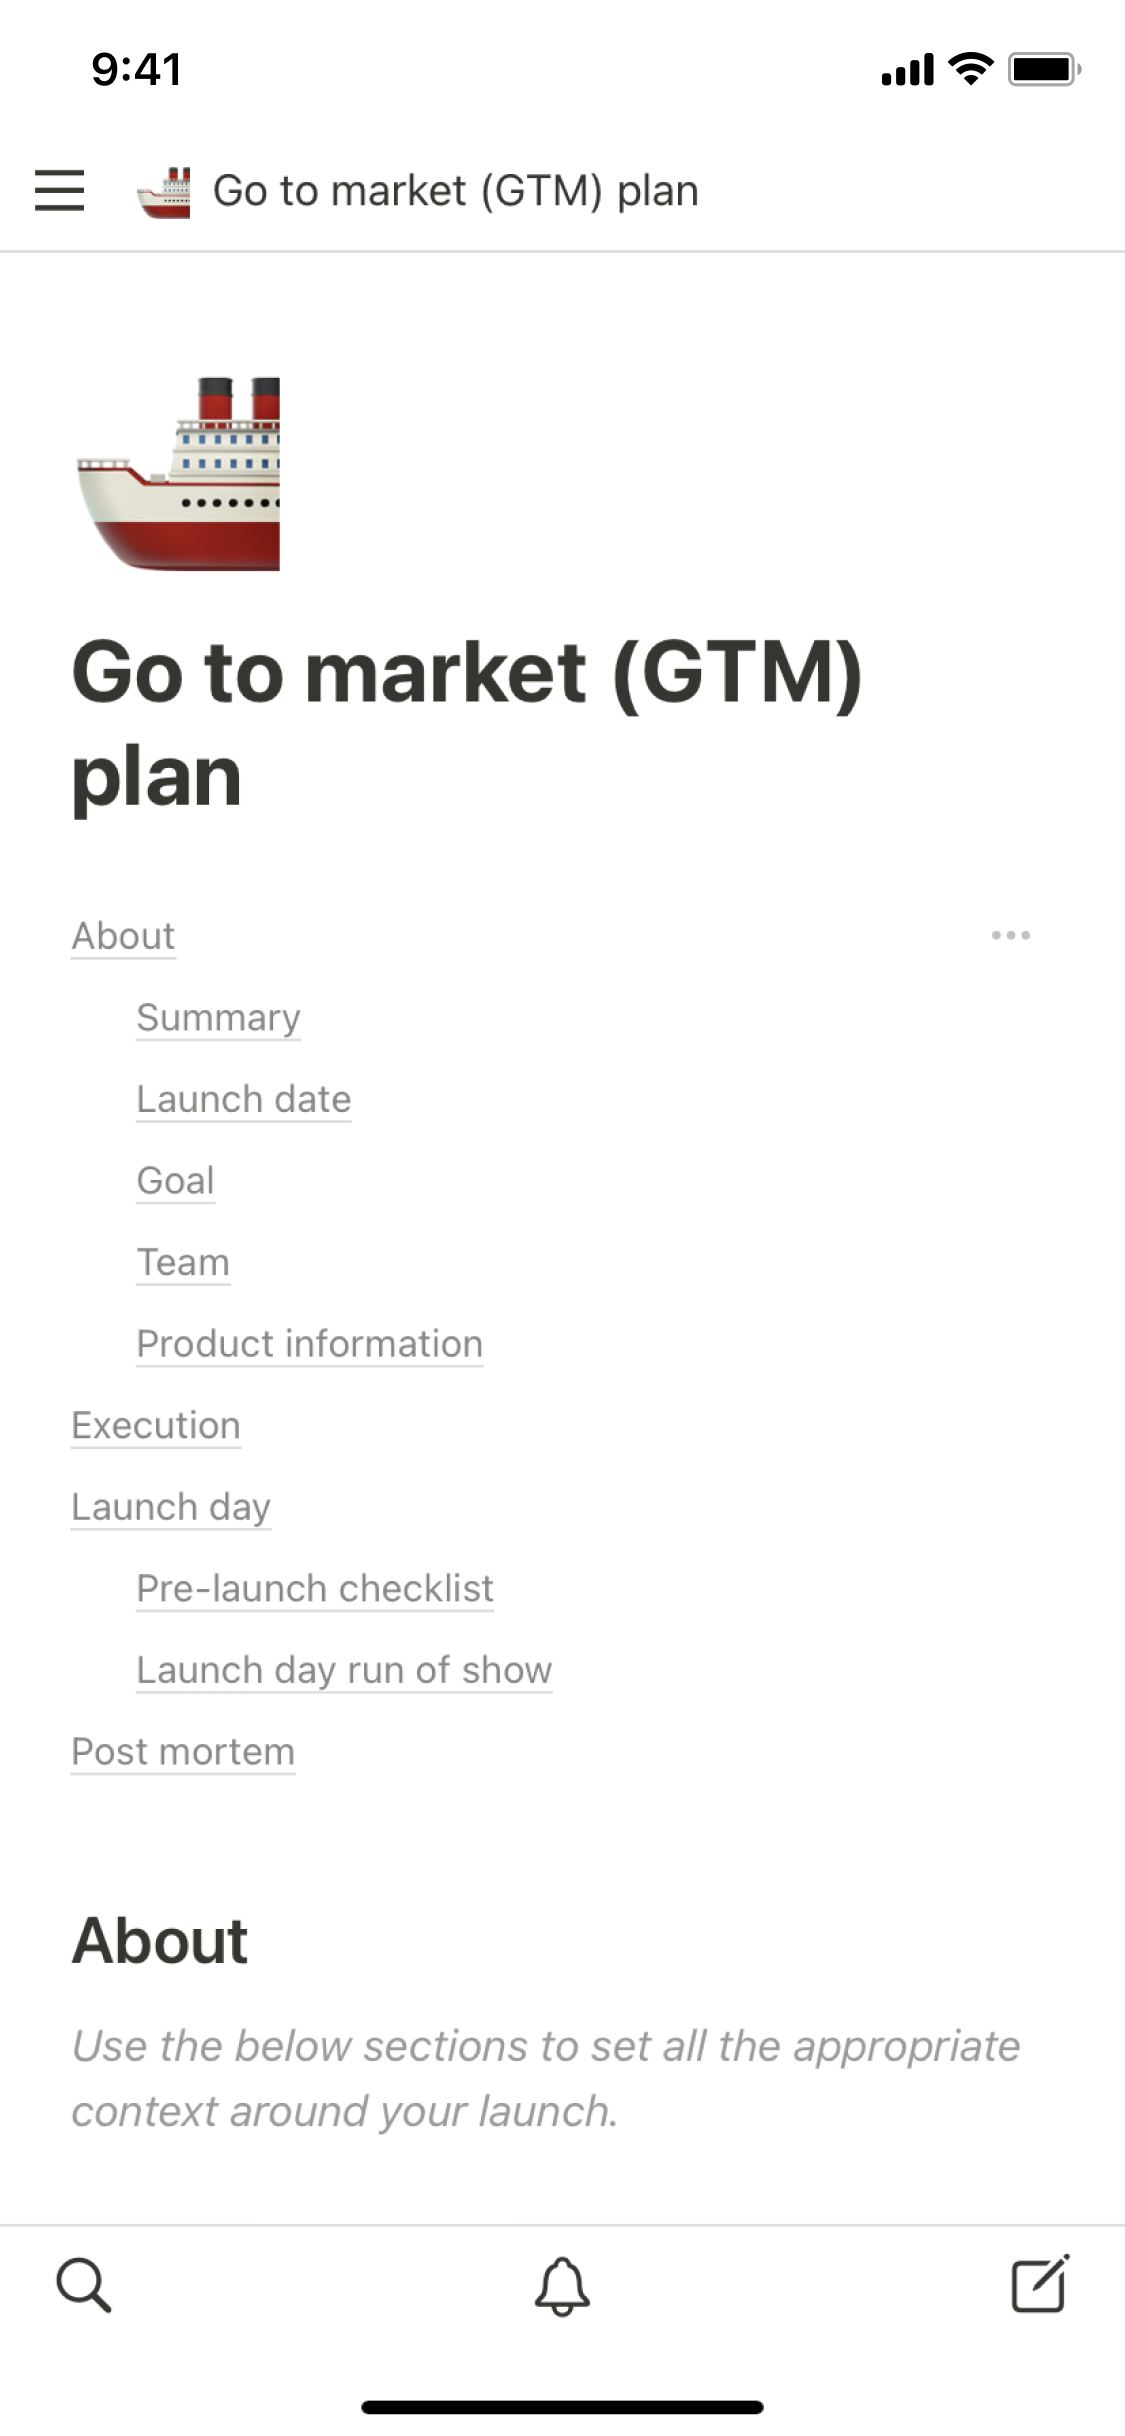 The mobile image for the Go to market (GTM) plan template